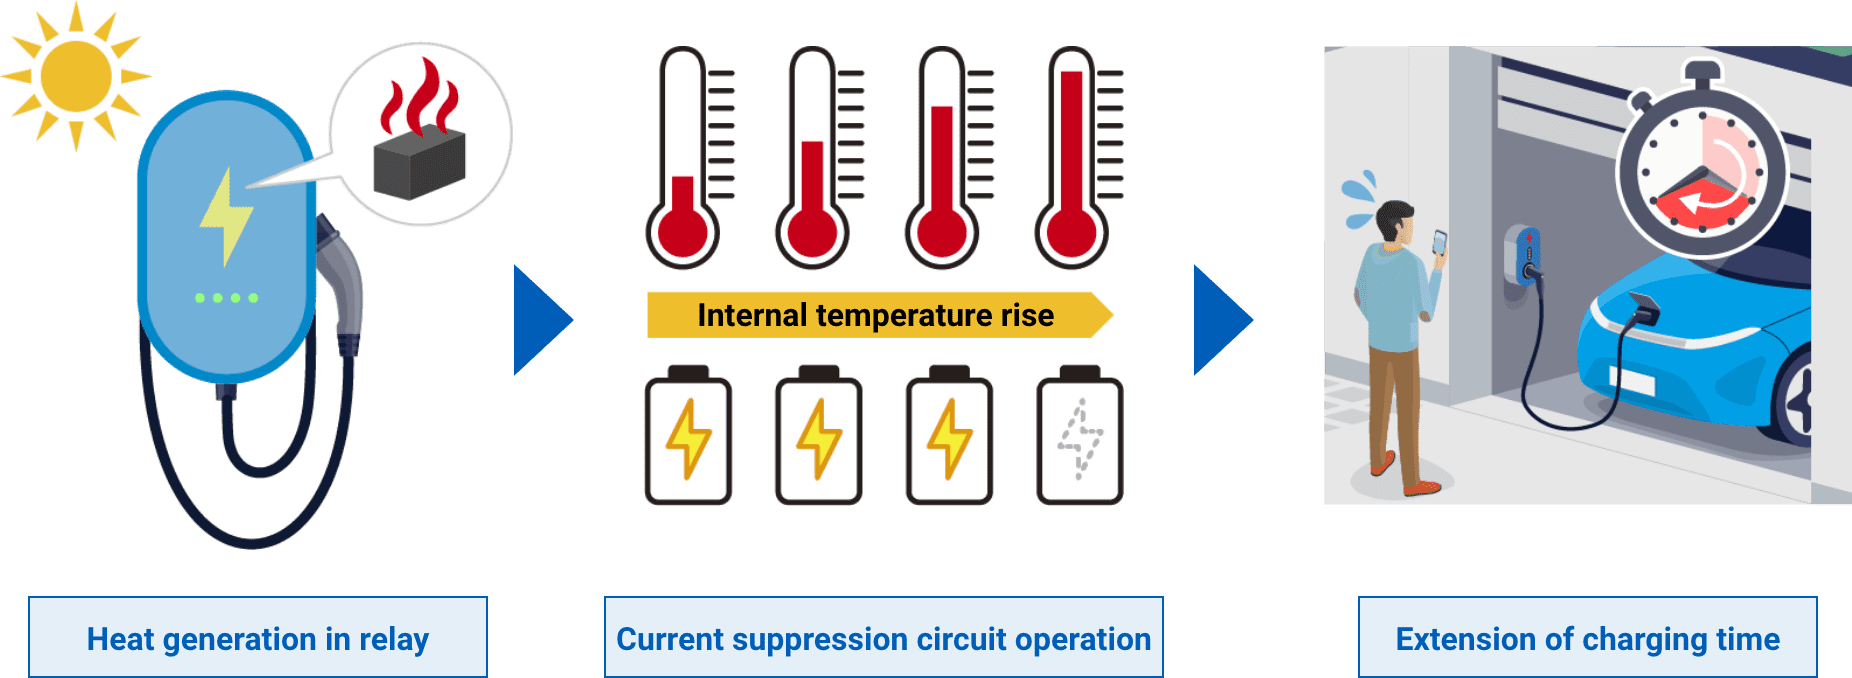 Heat generation in relay => Current suppression circuit operation => Extension of charging time